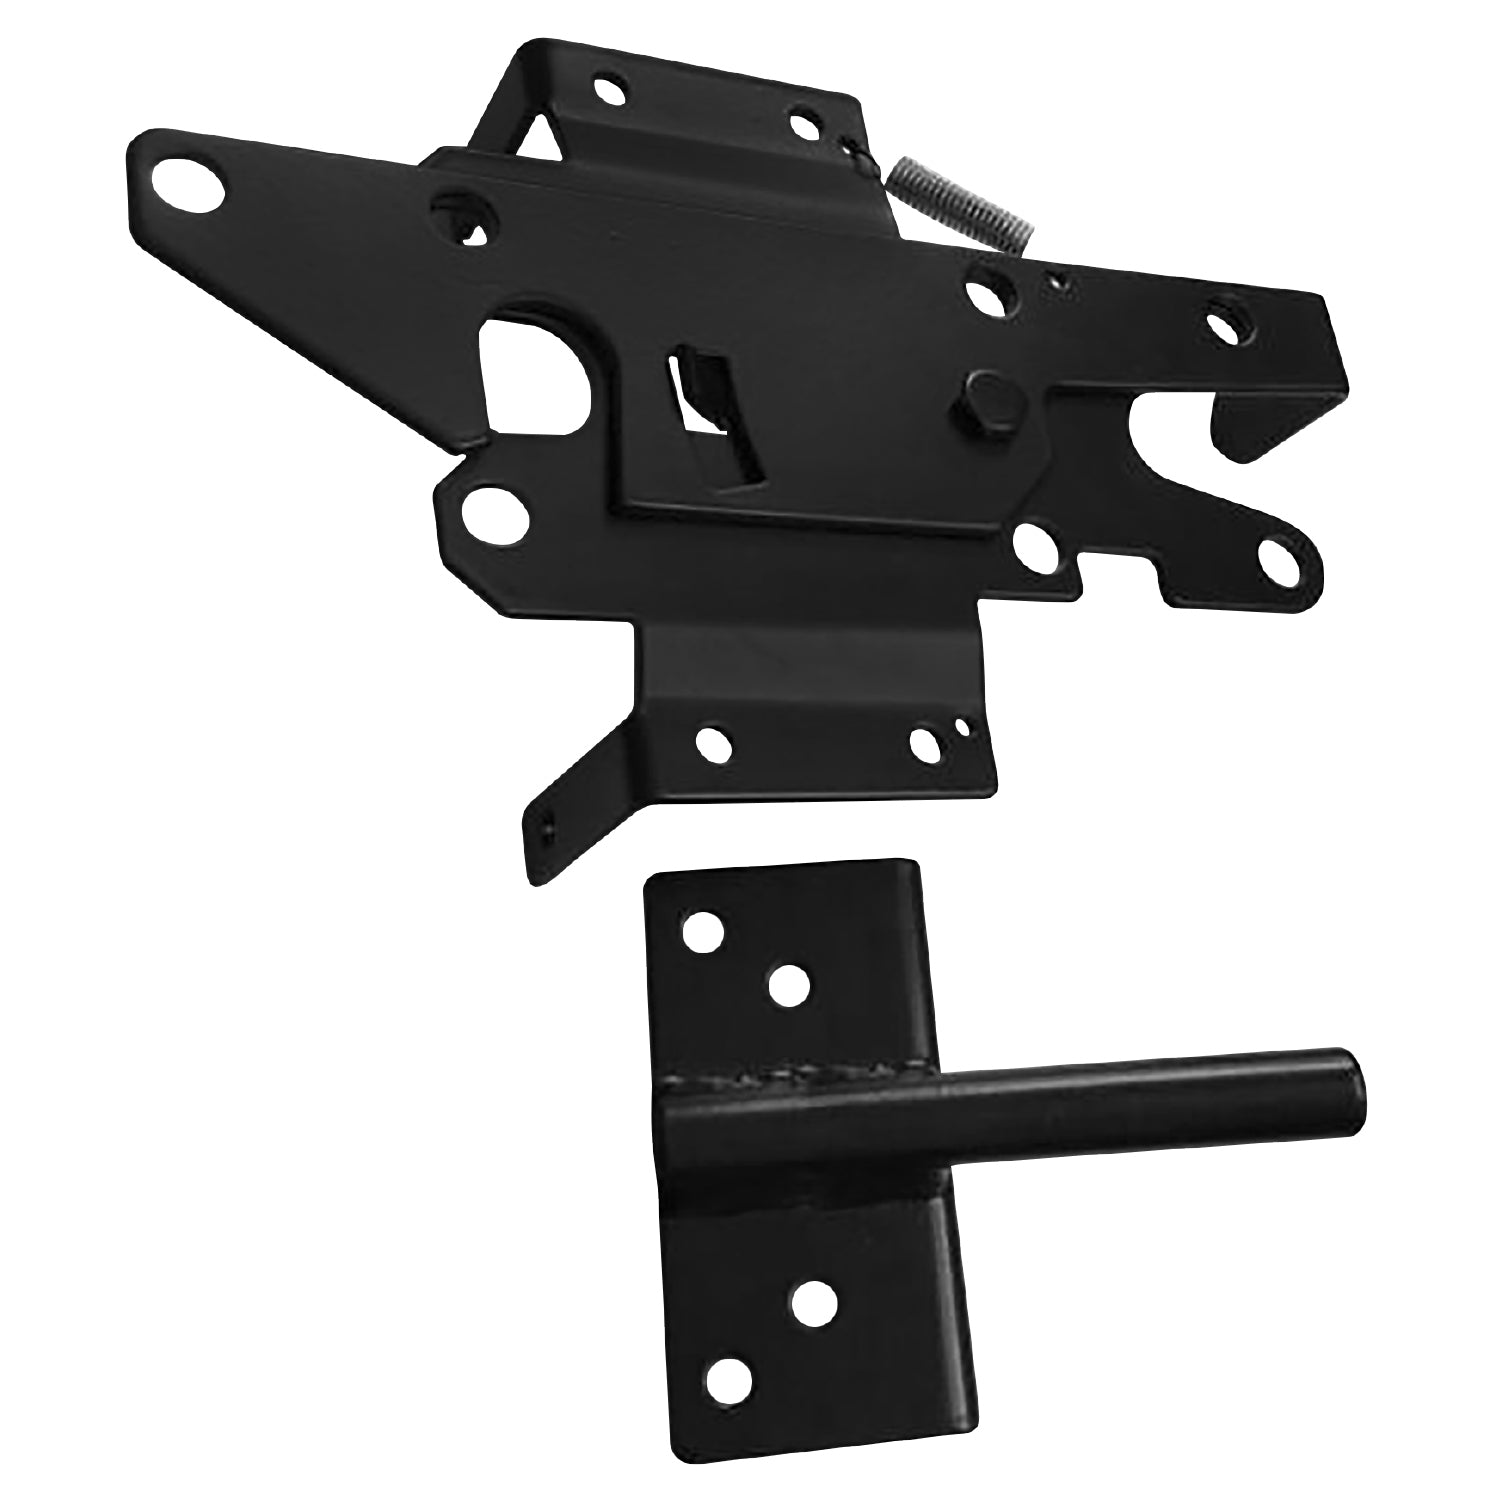 Steel Post Latch for Vinyl, fasteners included.